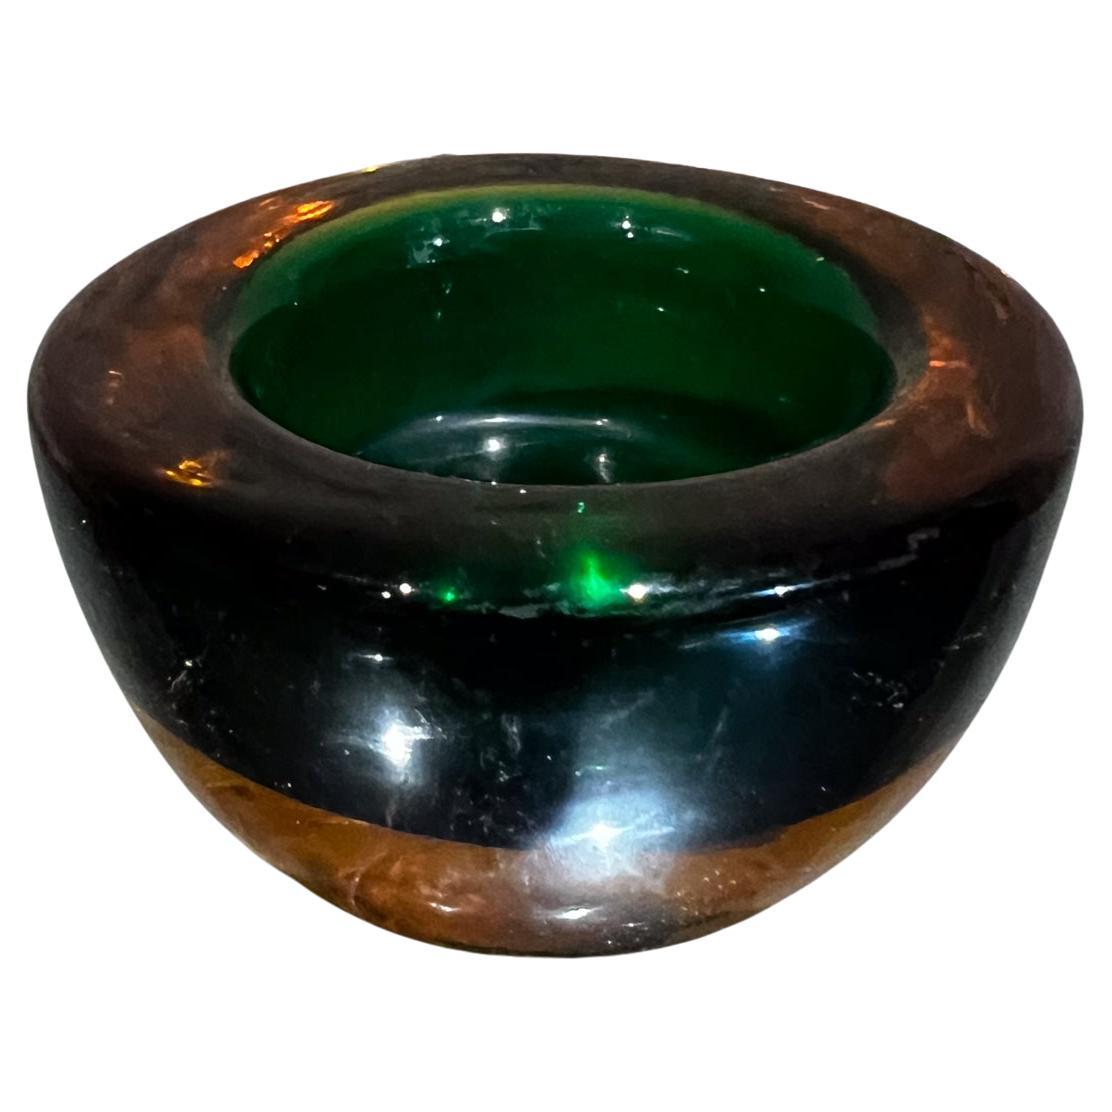 1960s Murano Green and Amber Sommerso Art Glass Votive Candle Holder
1.5 tall x 2.75 diameter
Preowned vintage condition.
Refer to all images.
